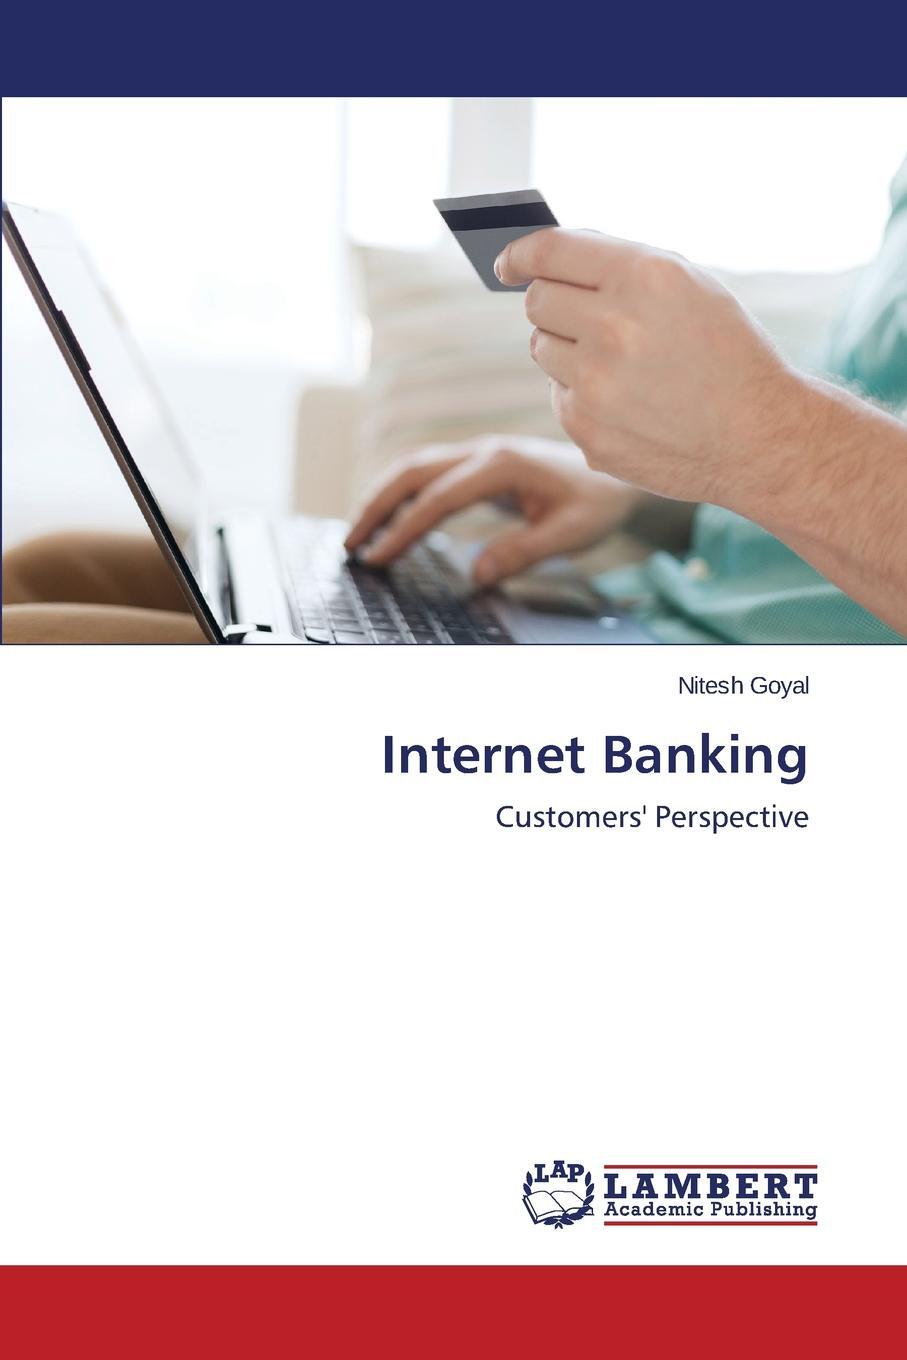 Banking book is. Internet Banking.